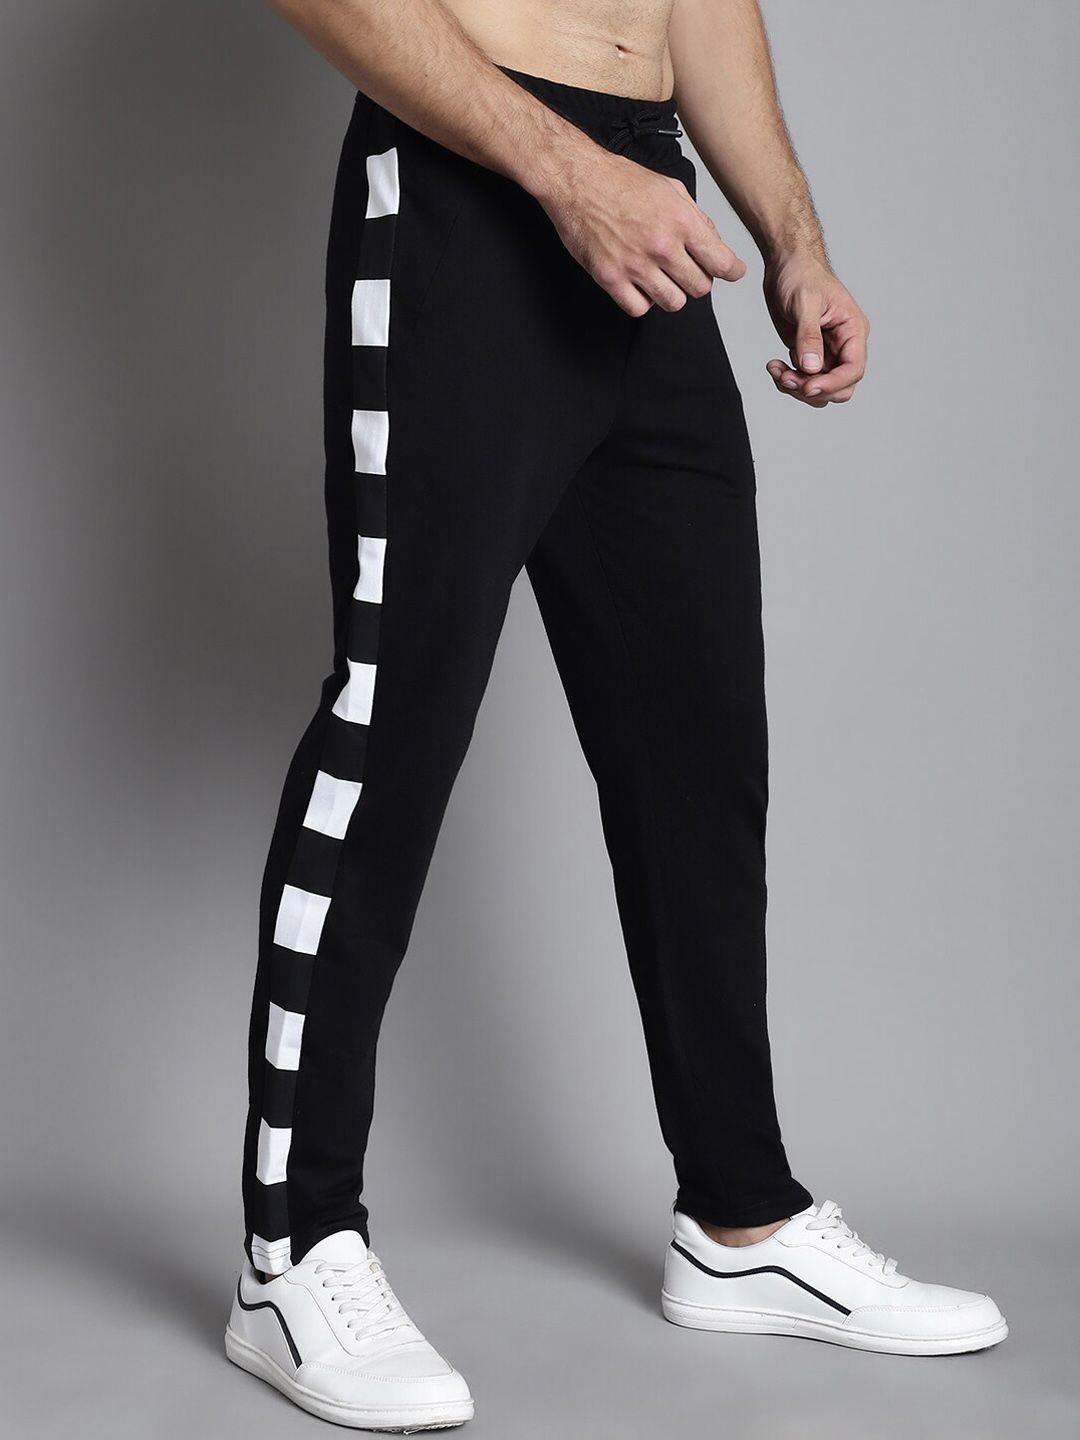 door74 men mid-rise side printed cotton joggers